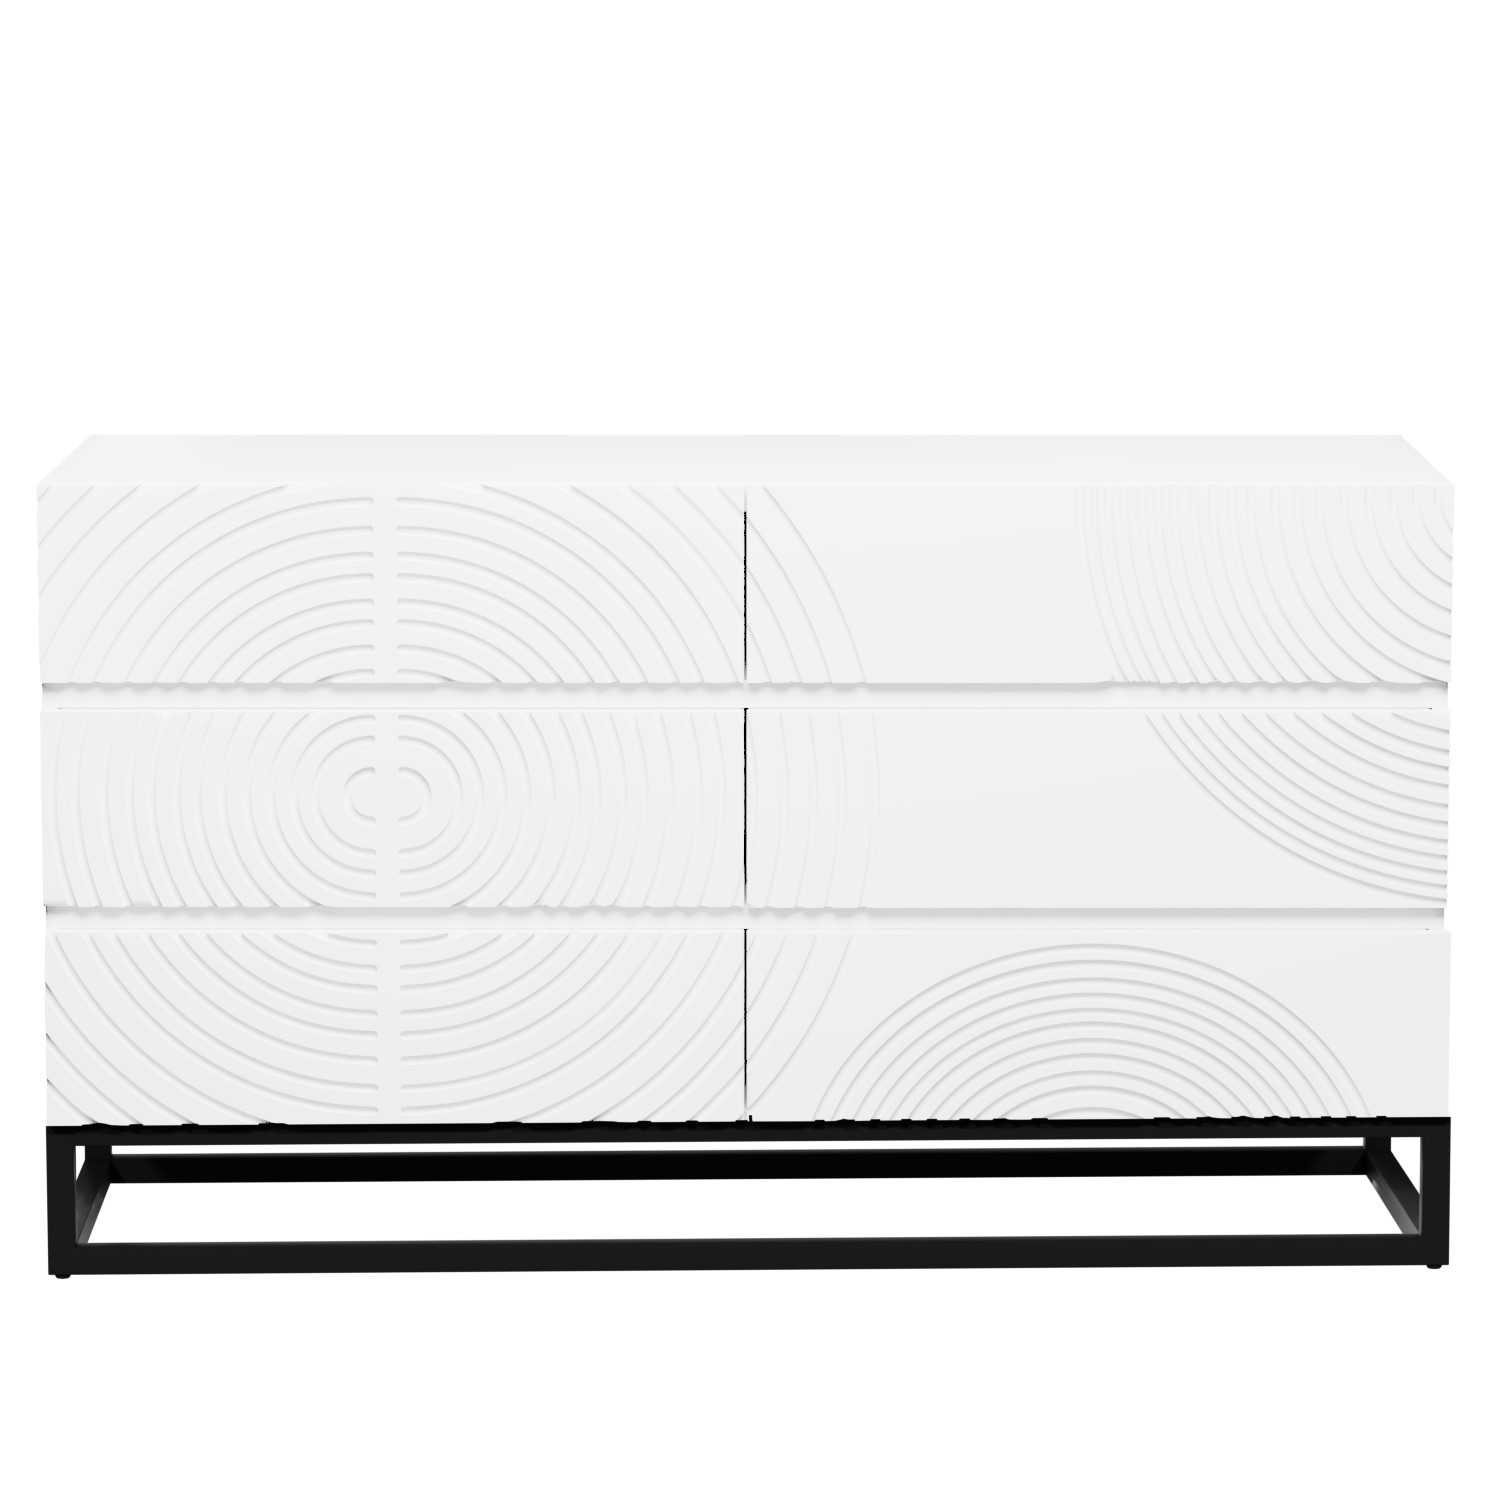 Read more about Wide white gloss patterned chest of 6 drawers with legs erin